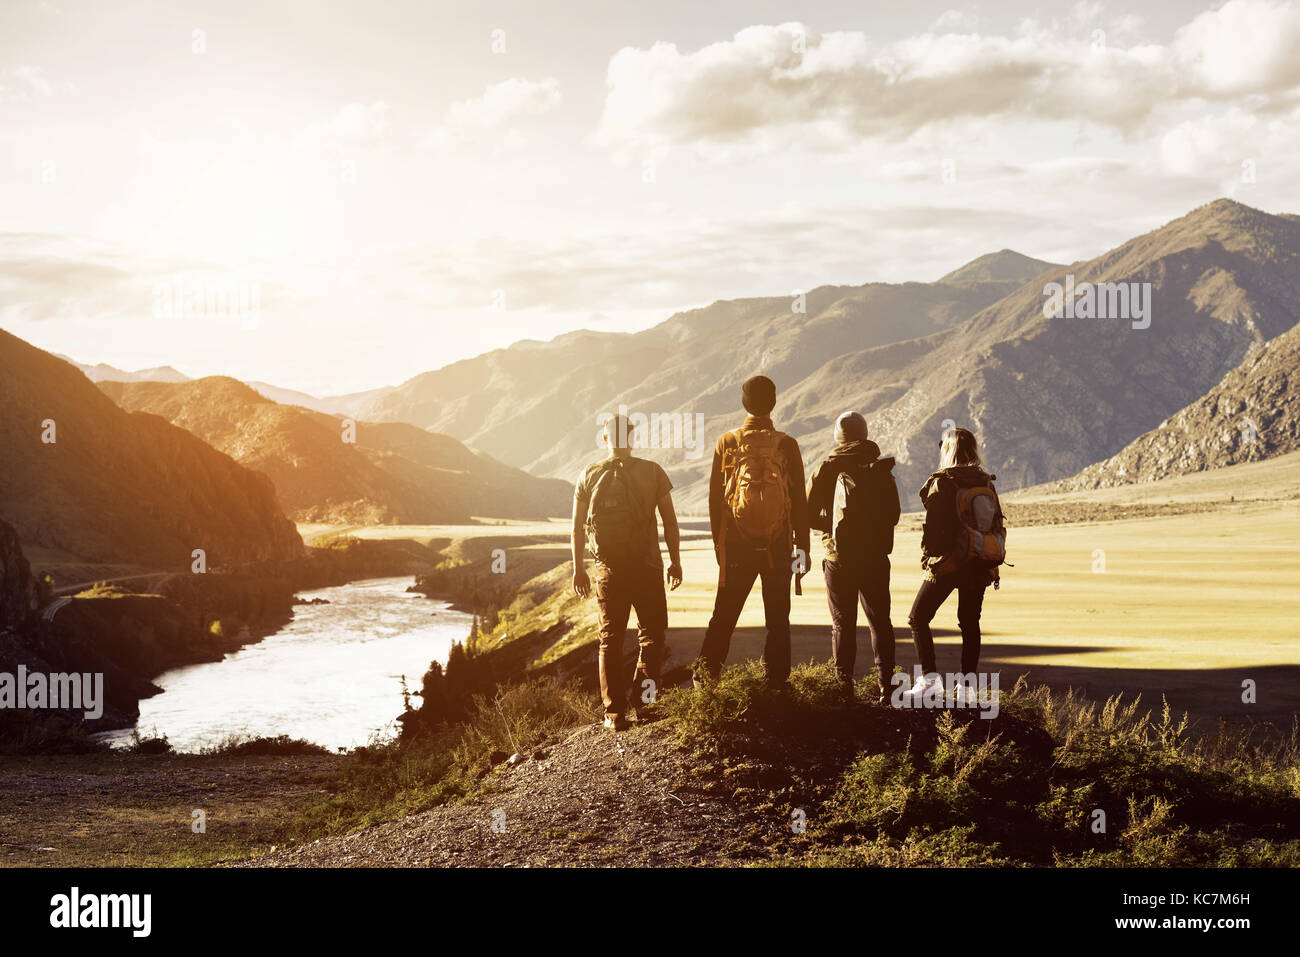 Group four people mountains travel concept Stock Photo